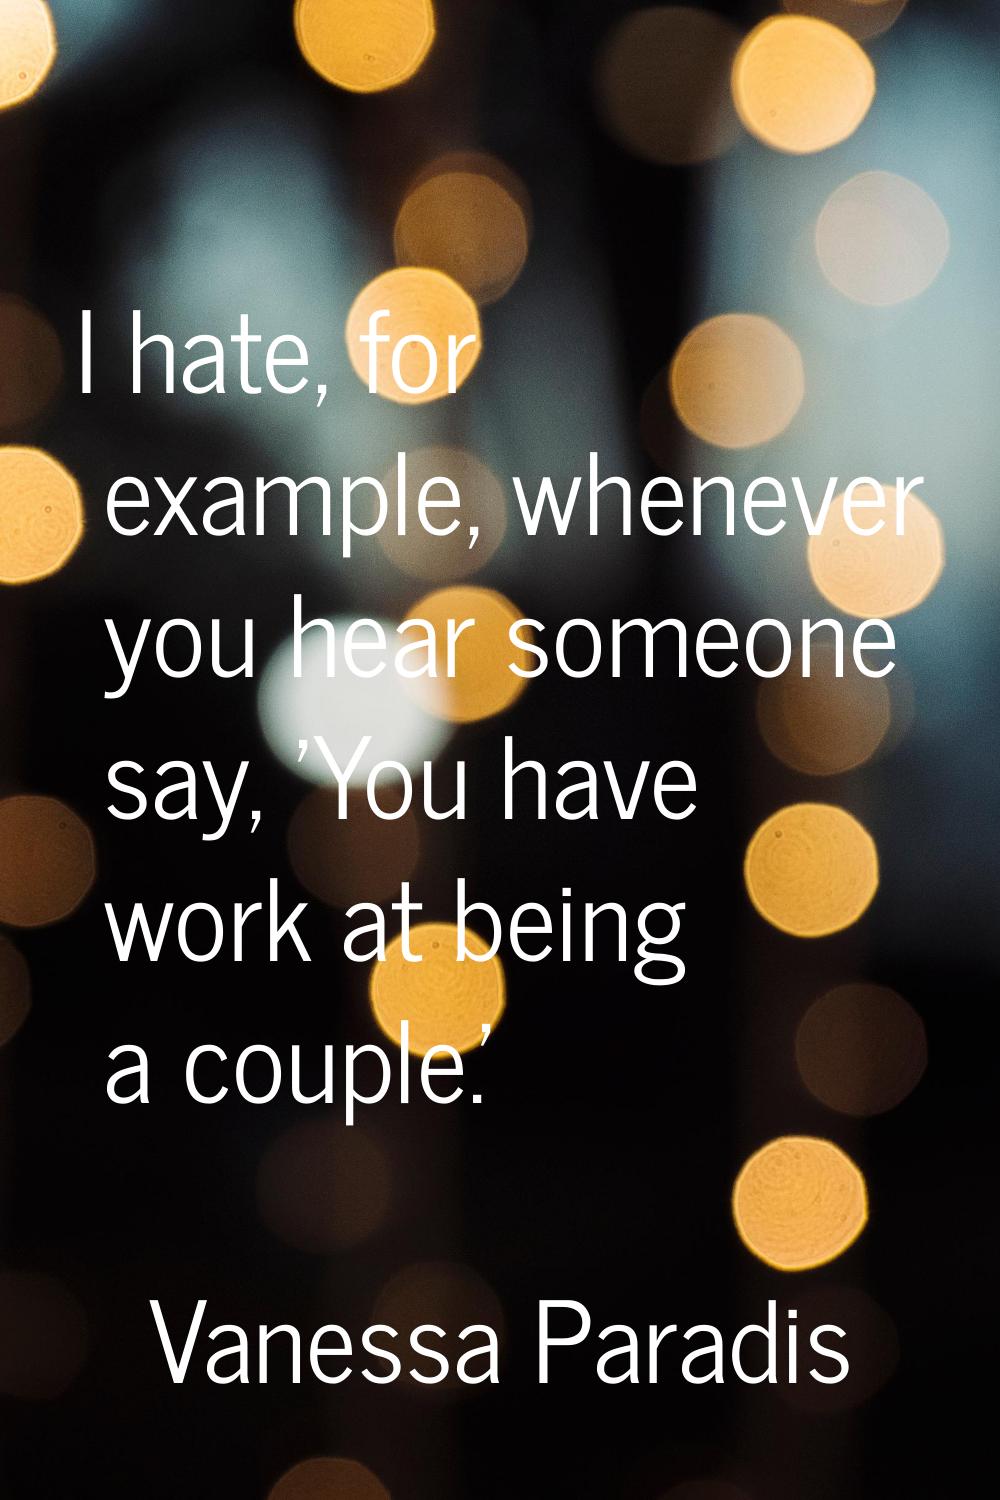 I hate, for example, whenever you hear someone say, 'You have work at being a couple.'